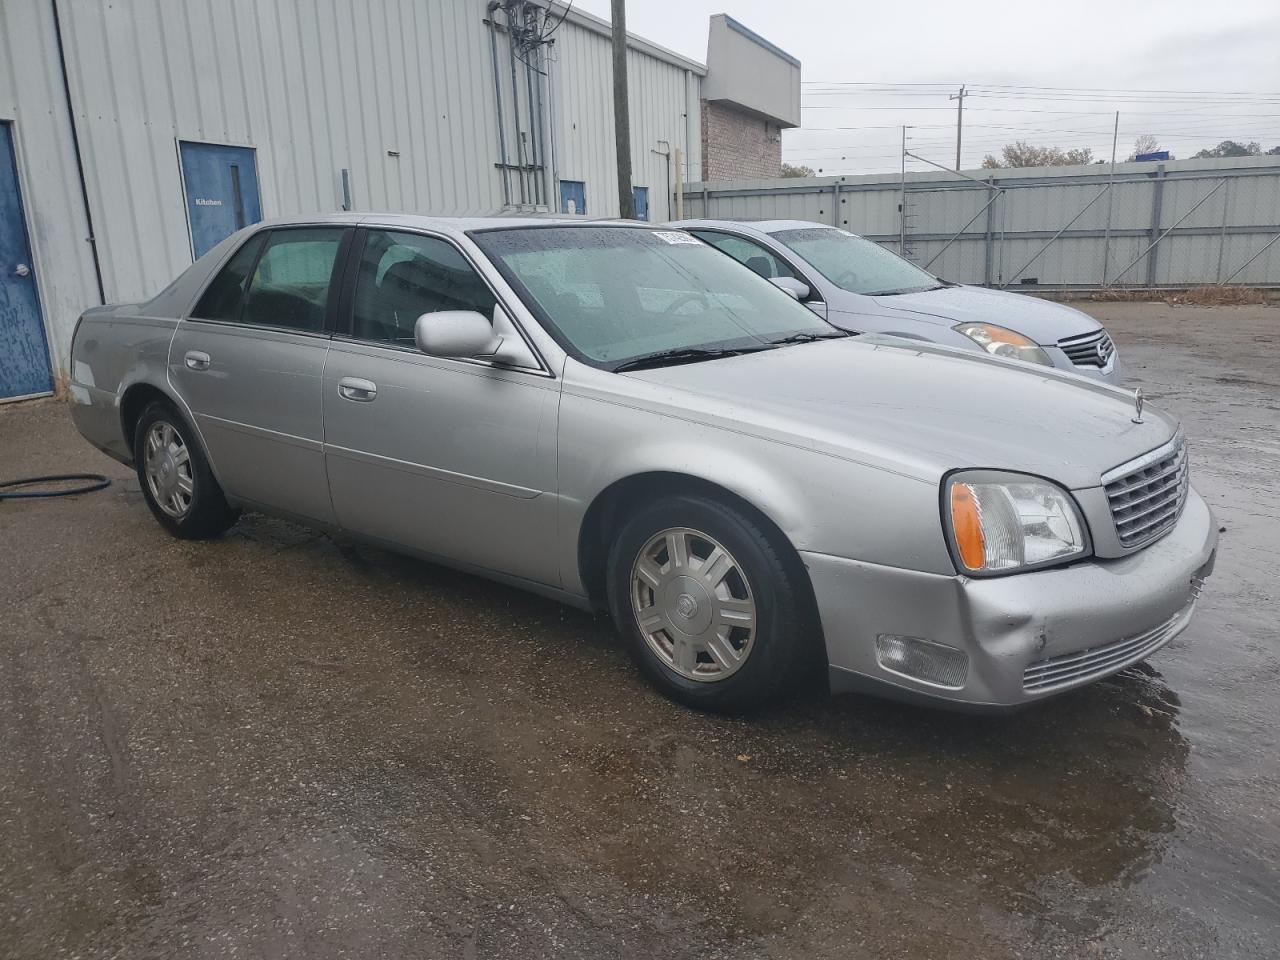 1G6KD54Y05U****** Salvage and Wrecked 2005 Cadillac DeVille in Alabama State